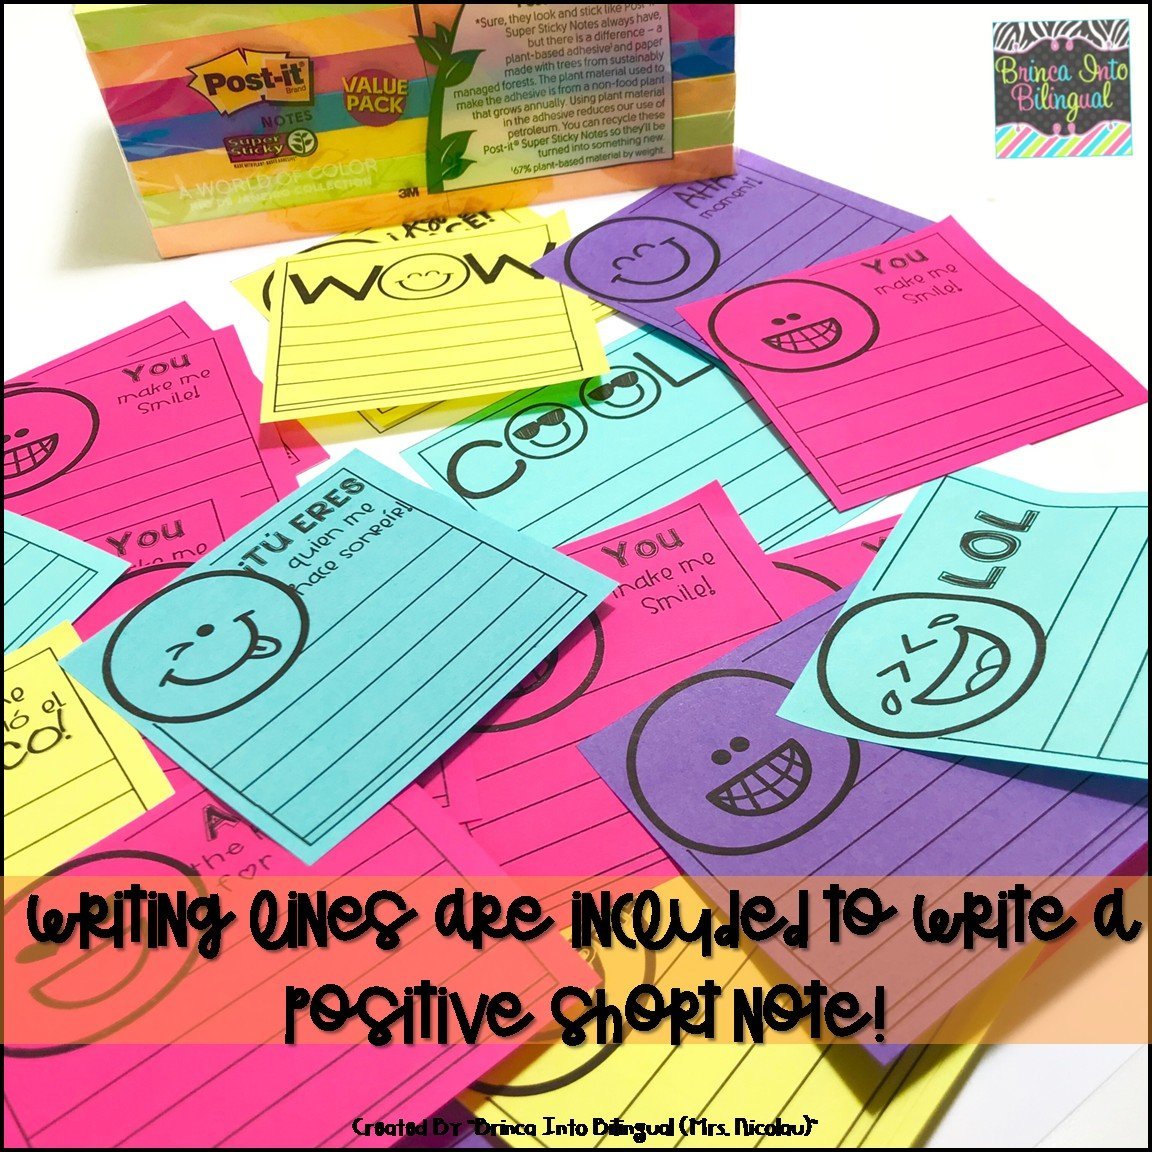 FREE SAMPLE Positive Post-Its Notes ENGL/SPAN – Bilingual Marketplace